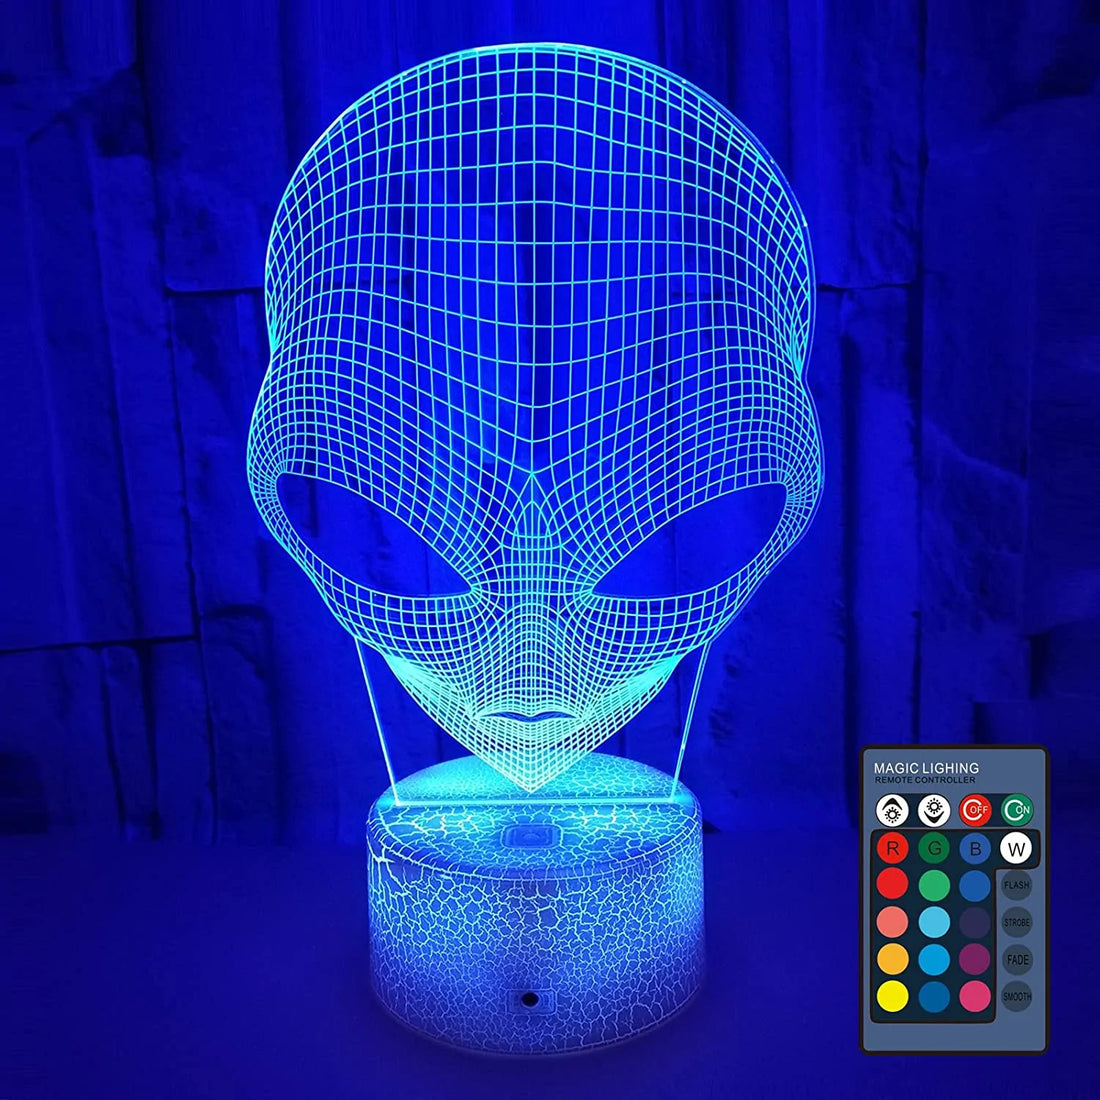 Add Some Magic to Your Home with the Alien Head 3D Night Light